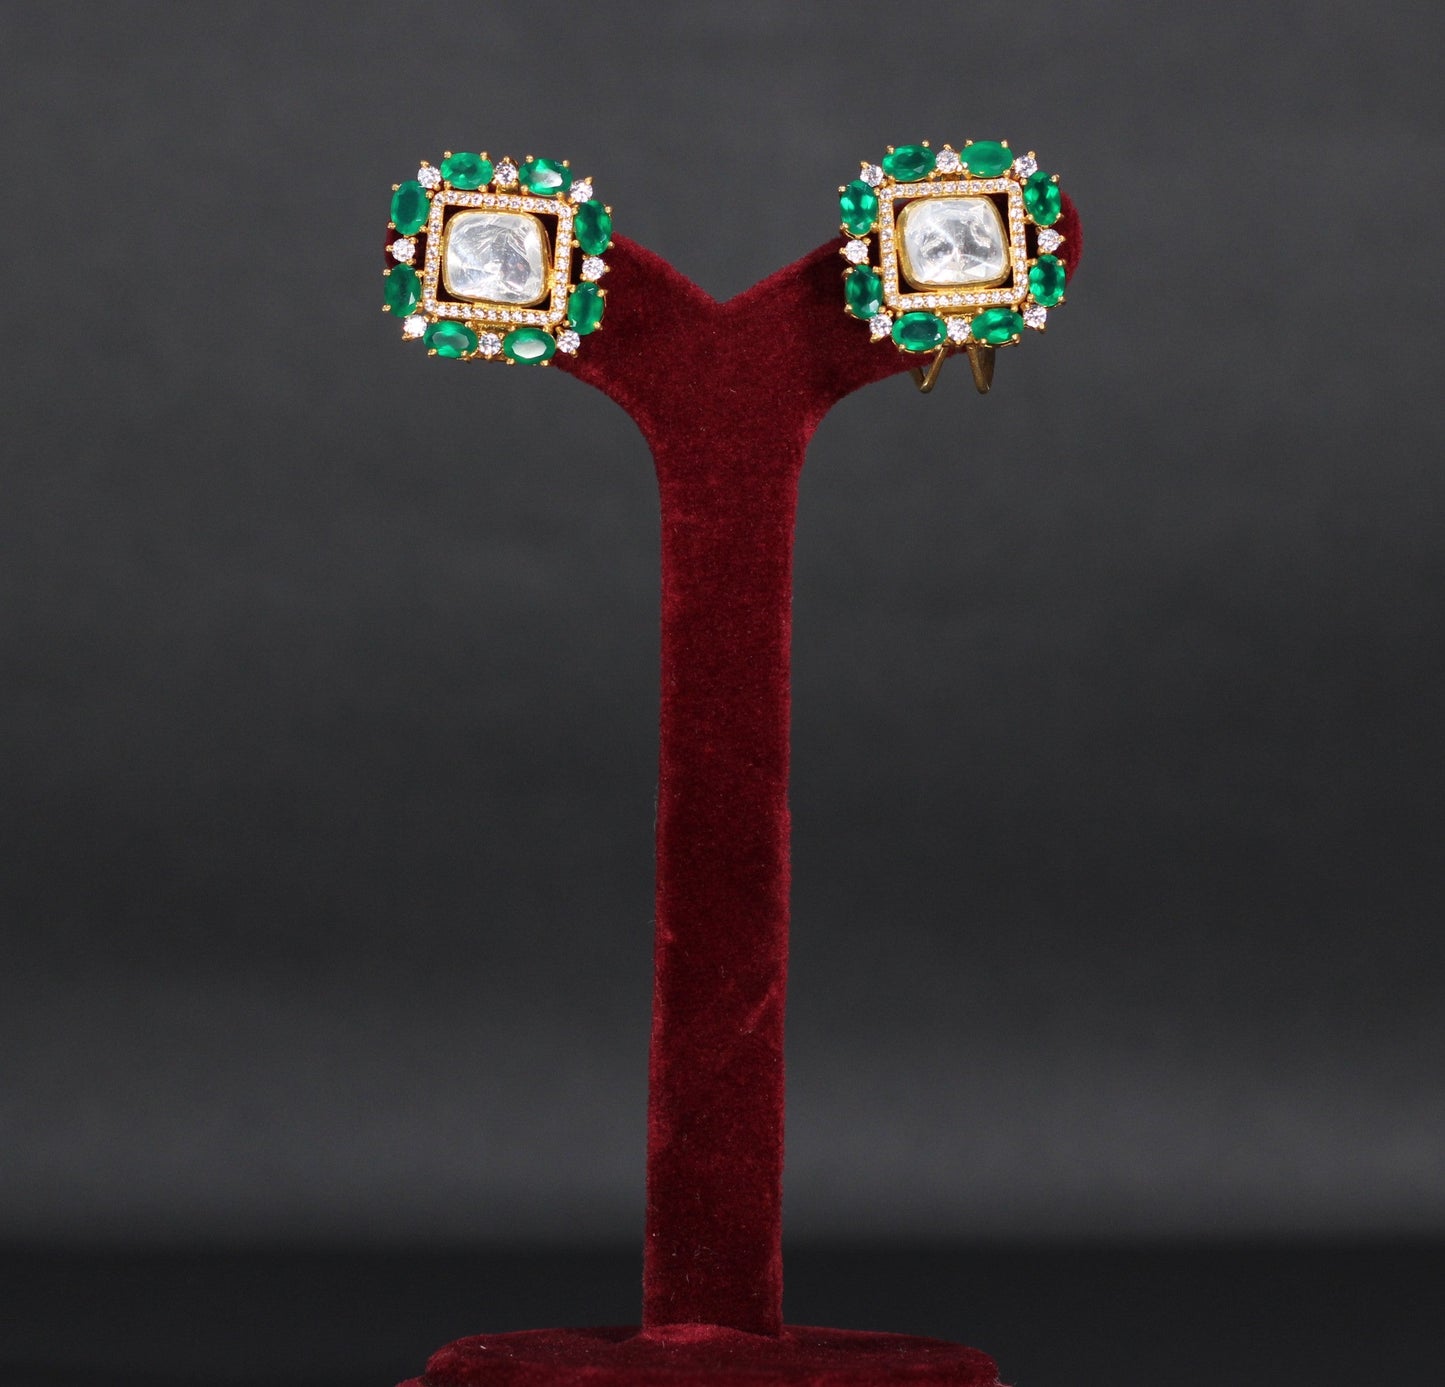 NECKLACE AND EARRING IN 92.5 STERLING SILVER IN 18KT GOLD PLATED WITH moissanite POLKI AND GREEN ONYX WITH ZIRCONIA